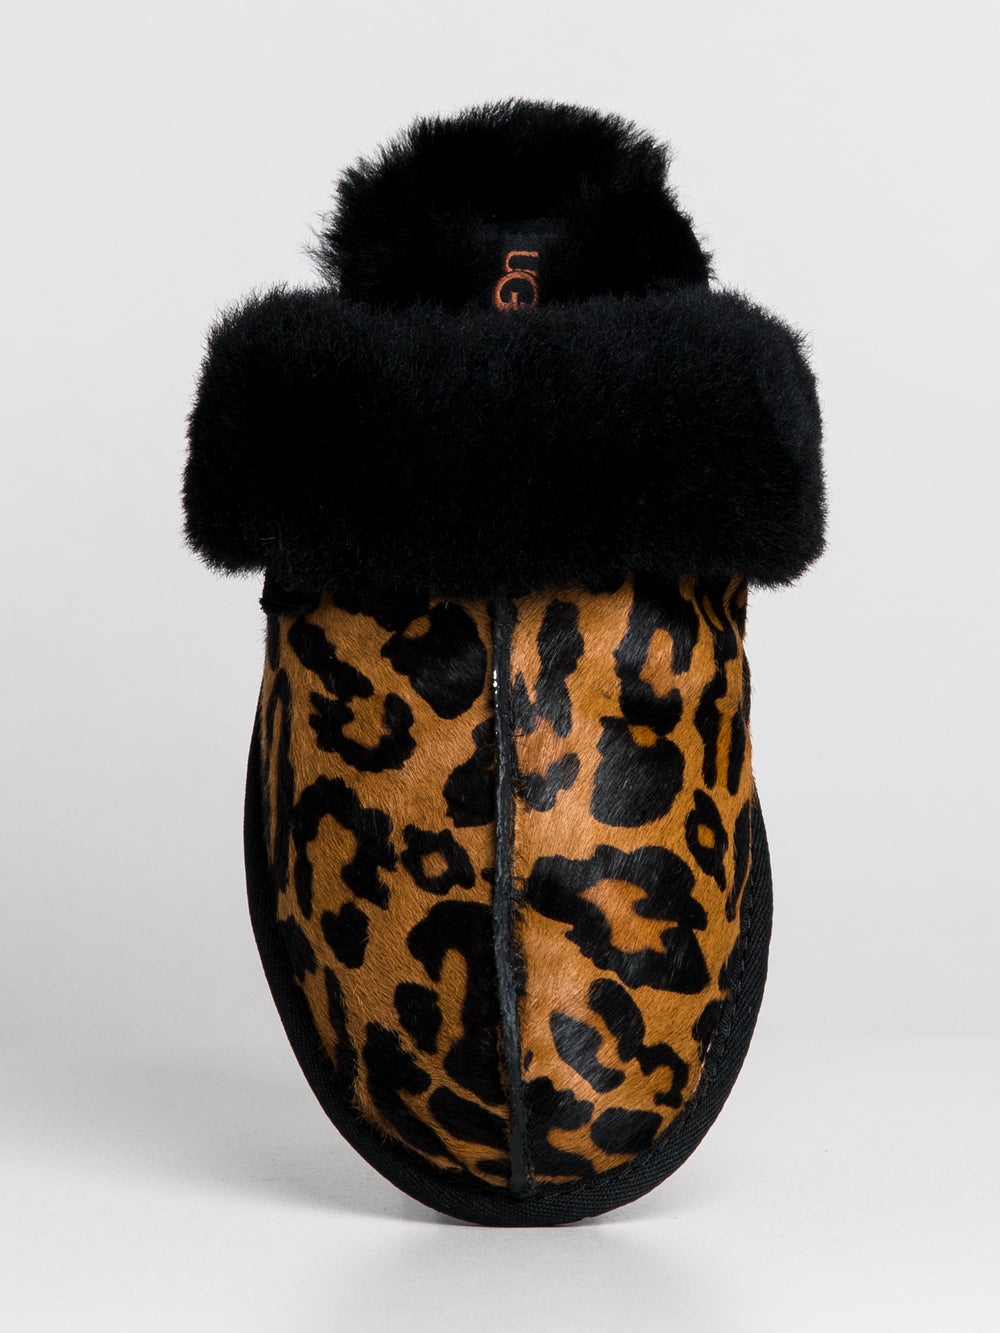 WOMENS UGG SCUFFETTE II PANTHER PRINT - CLEARANCE